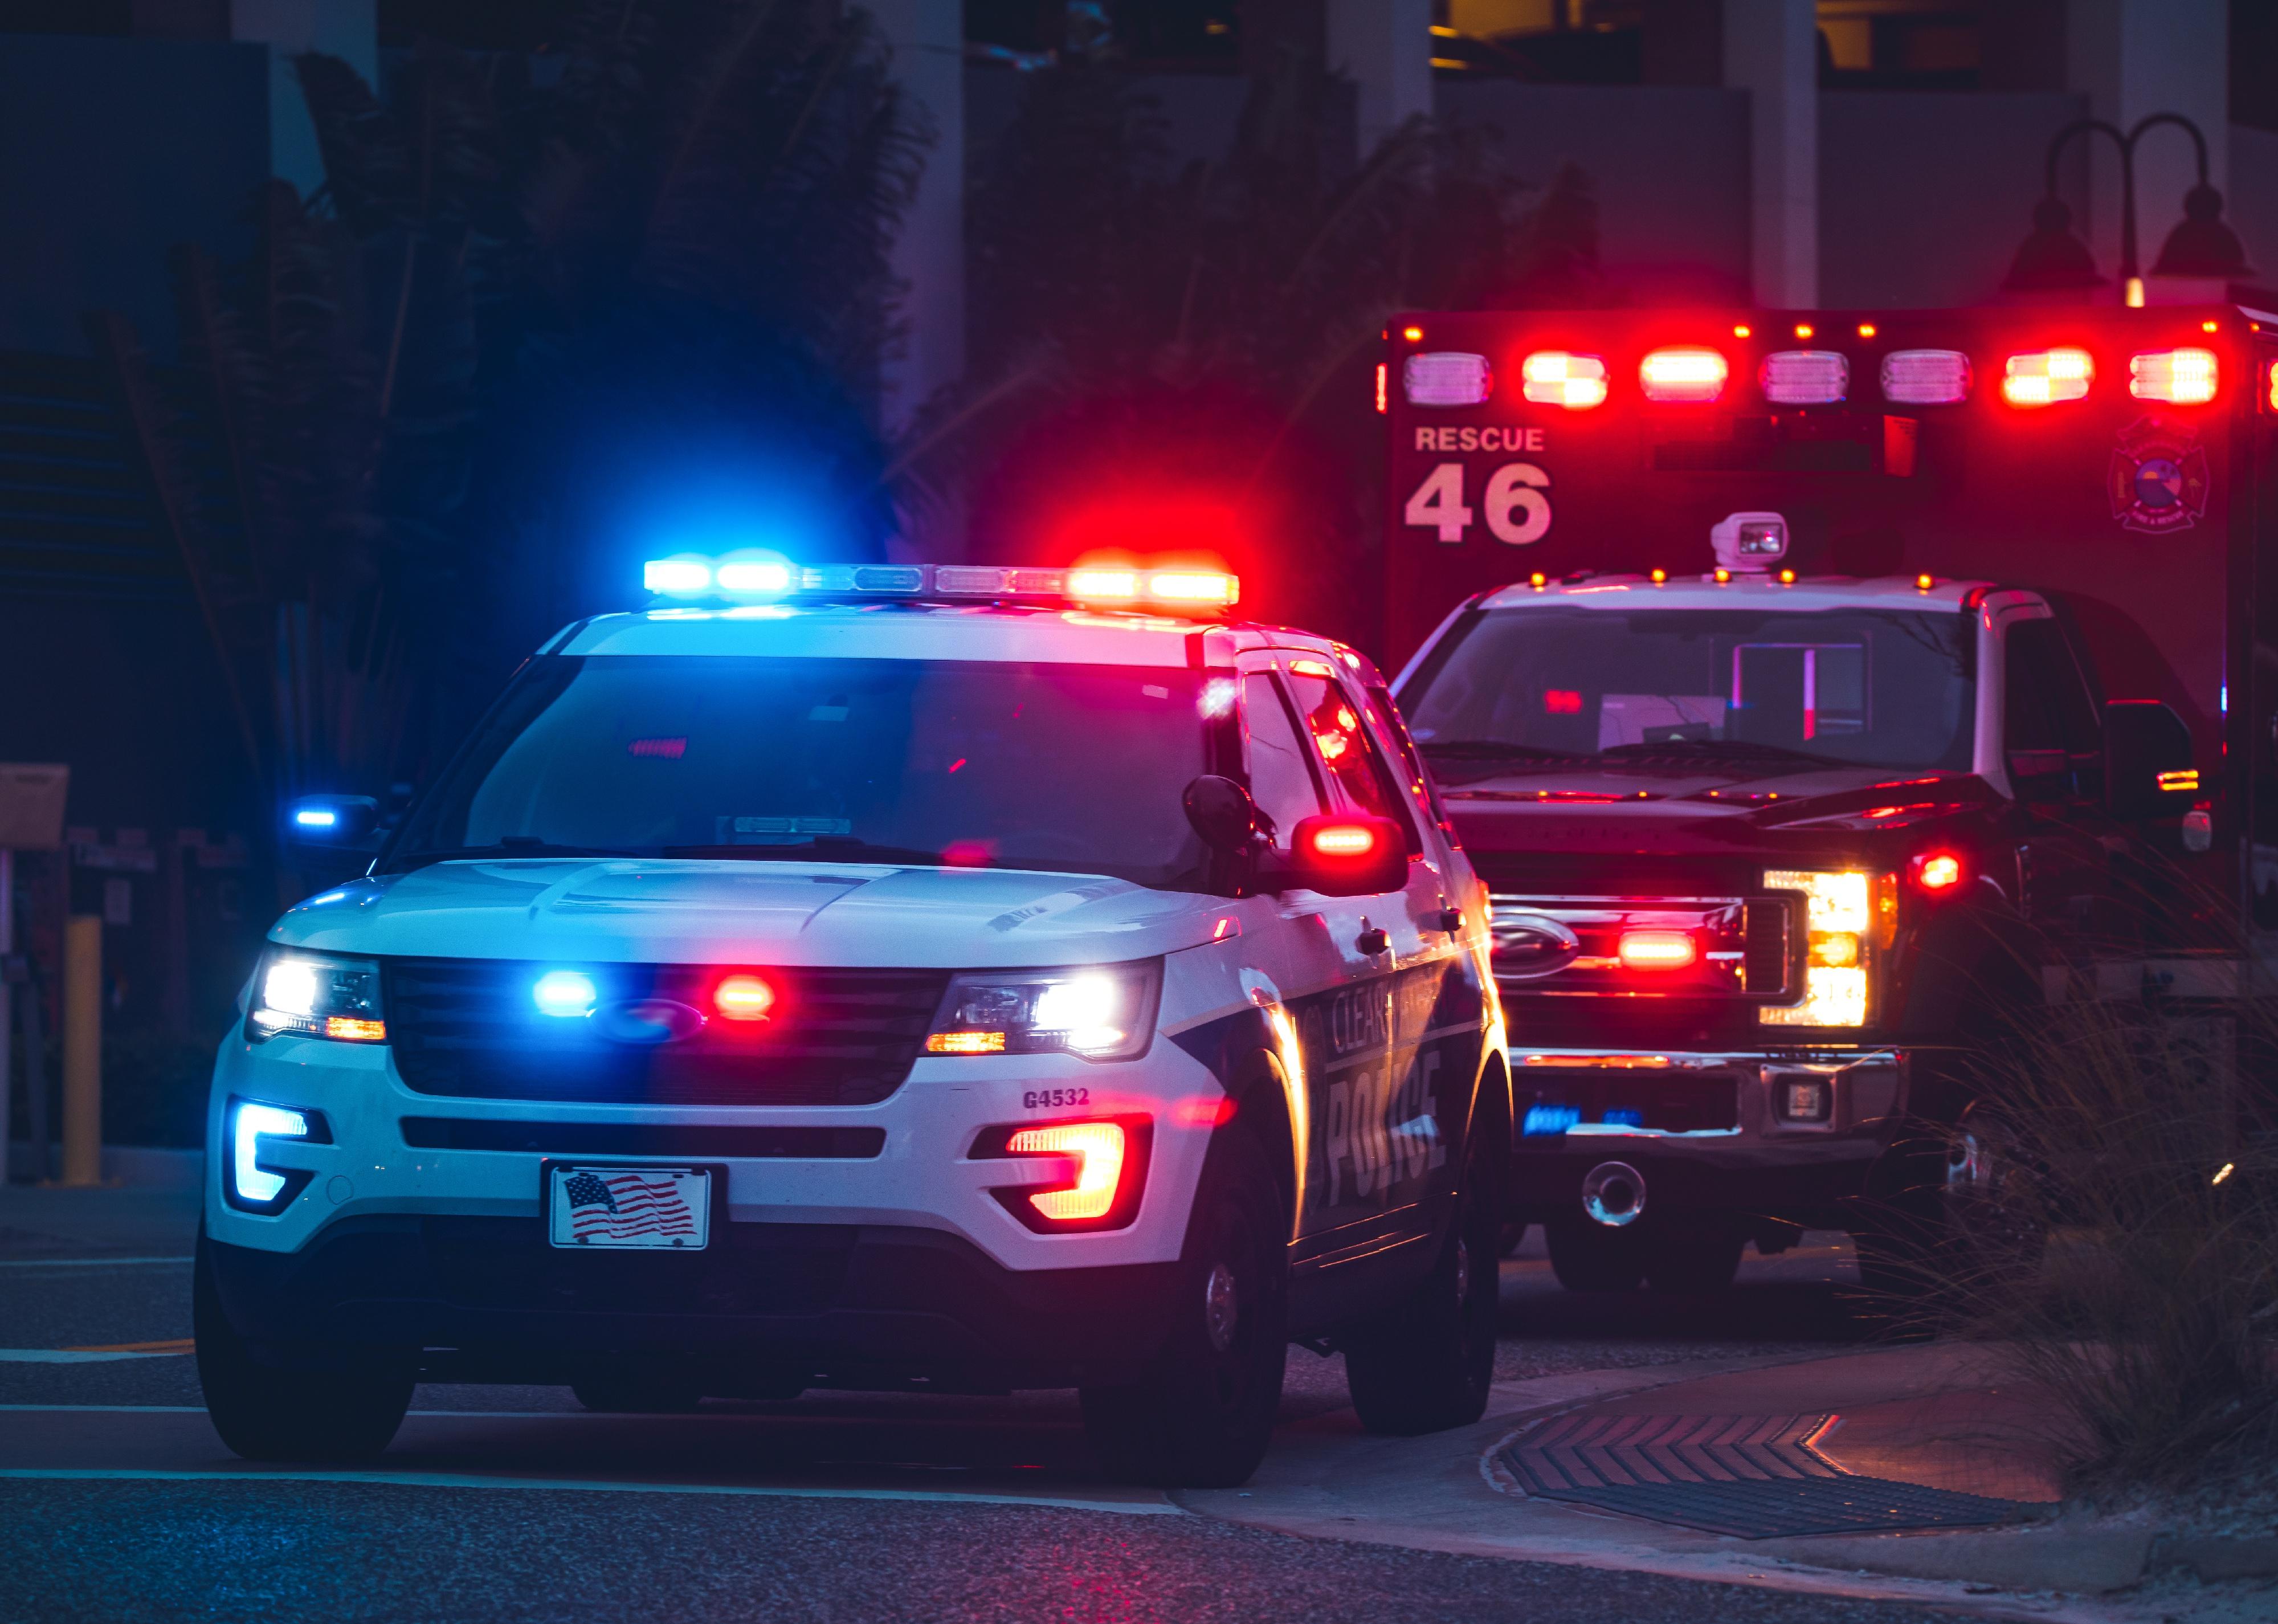 American Police Car and Emergency truck with blue and red lights.